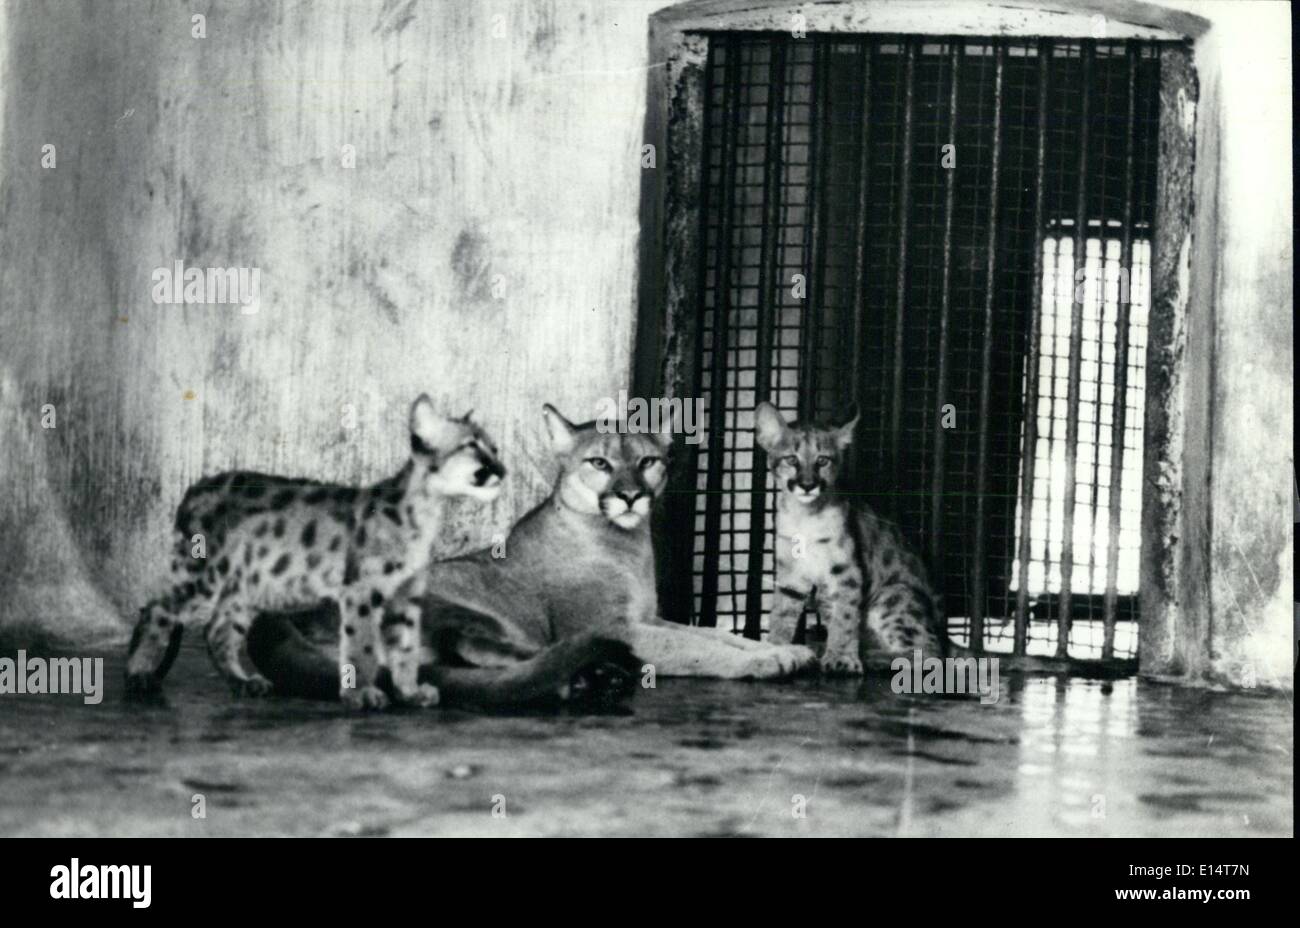 Apr. 18, 2012 - Two cubs - a male and a female were given birth by a pair of Pumas -also known as Mountain Lions or Cougar at Alipore Zoo in Calcutta on March 20,75. The pair of Pumas were acquired from M/s Ravens ton Zoological Co.Ltd.,of U.K.as part of preparation for the Century Celebrations of the Alipore Zoo. the pair were christened as Shikhar Shikhari by West Bengal Minister Pradip Bhattacharya. Pumas are found in N&s America extending from S.Canada to patagonia. They hunt much on ground & deer seems to be their favorite food Stock Photo